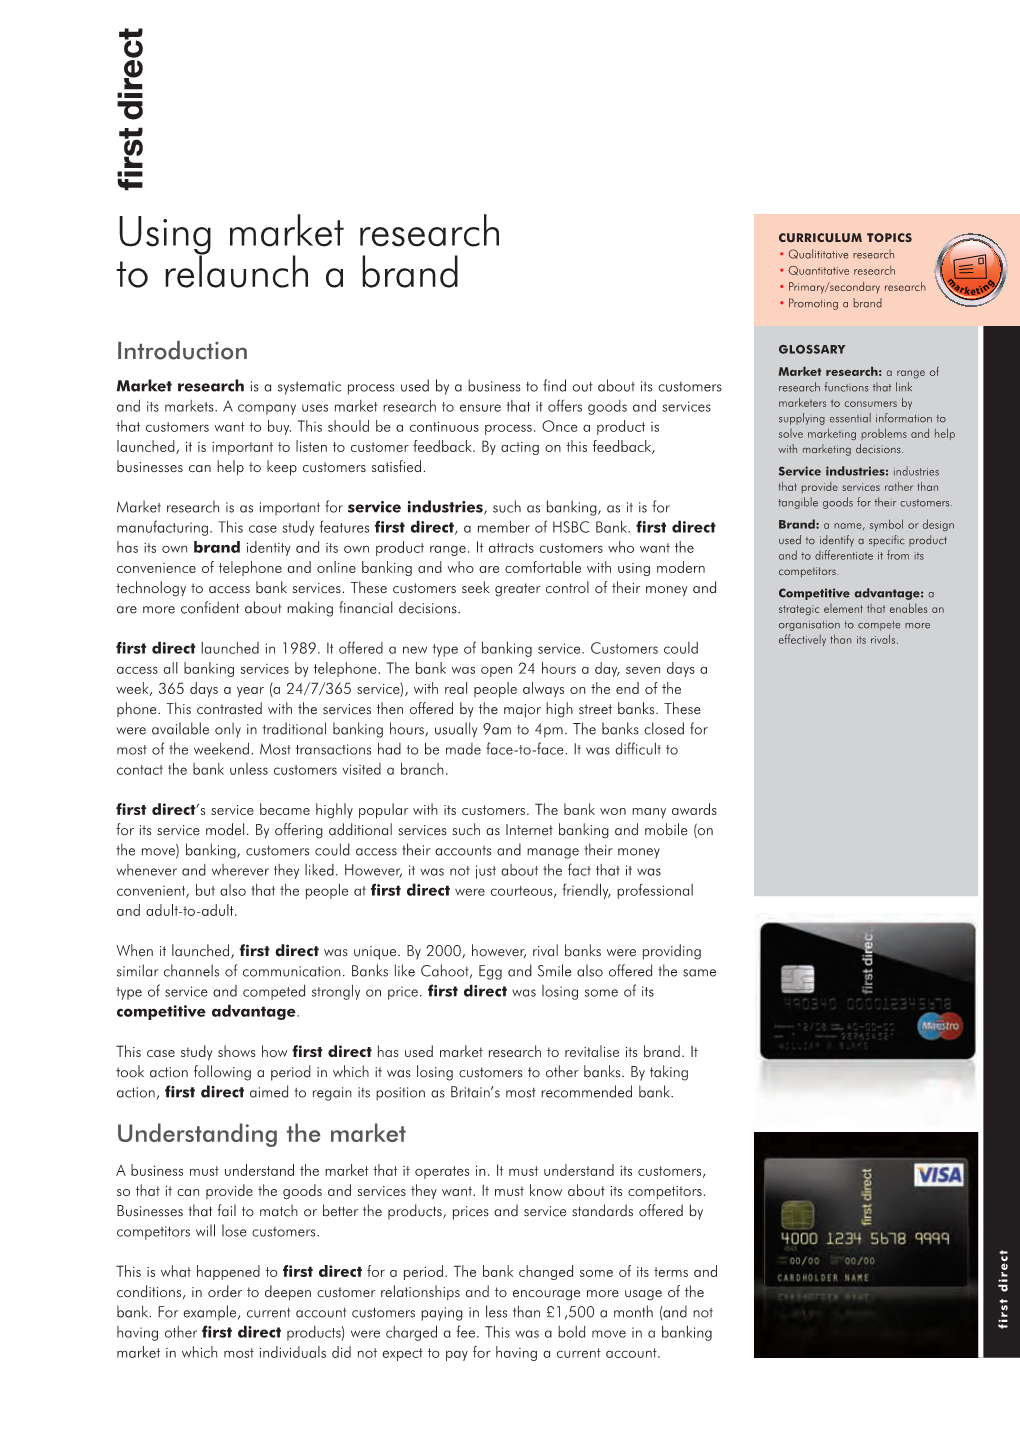 Using Market Research to Relaunch a Brand